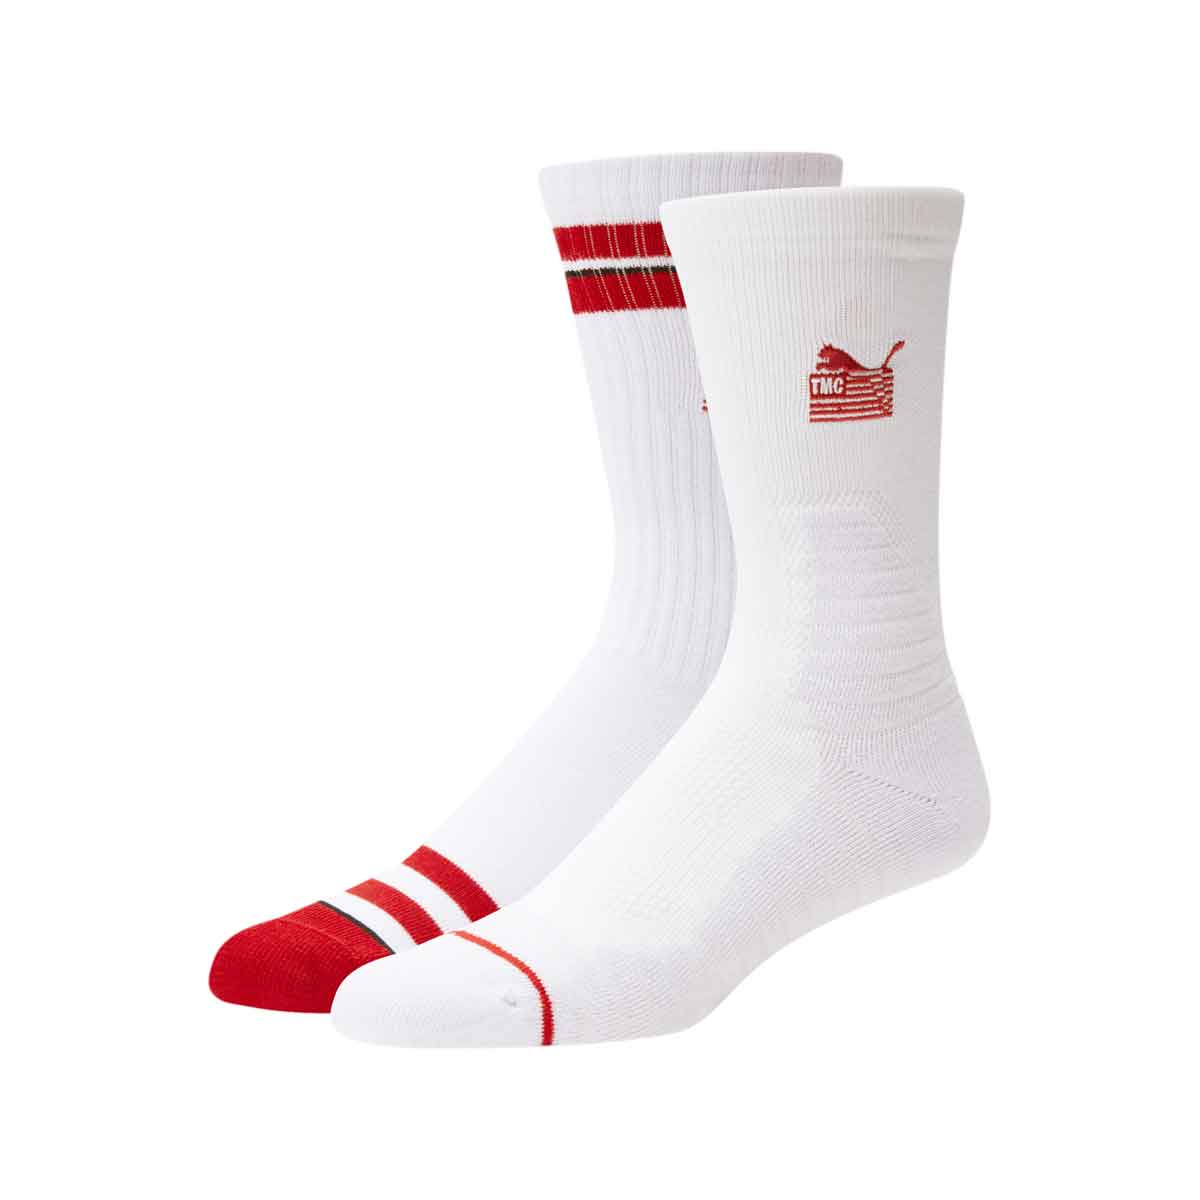 PUMA x TMC Everyday Hussle Collection Socks - White/Red (2 pack)